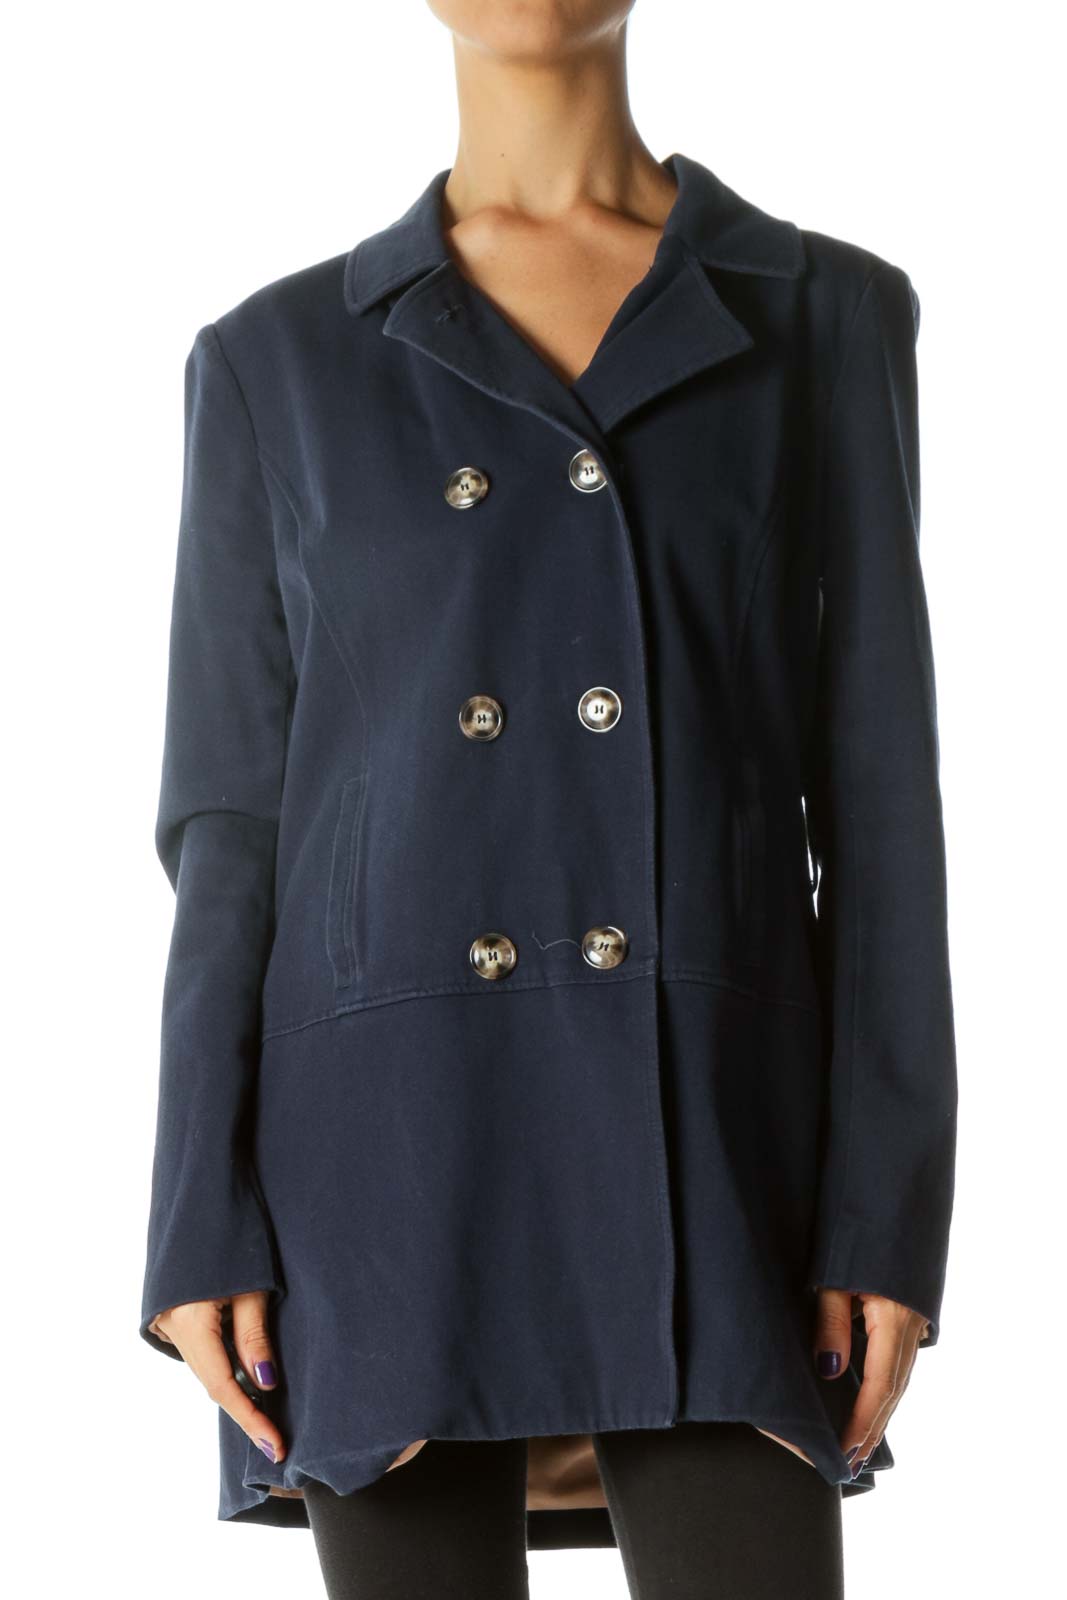 Navy Blue Double-Breasted Long Sleeve Coat (Missing Belt) Front